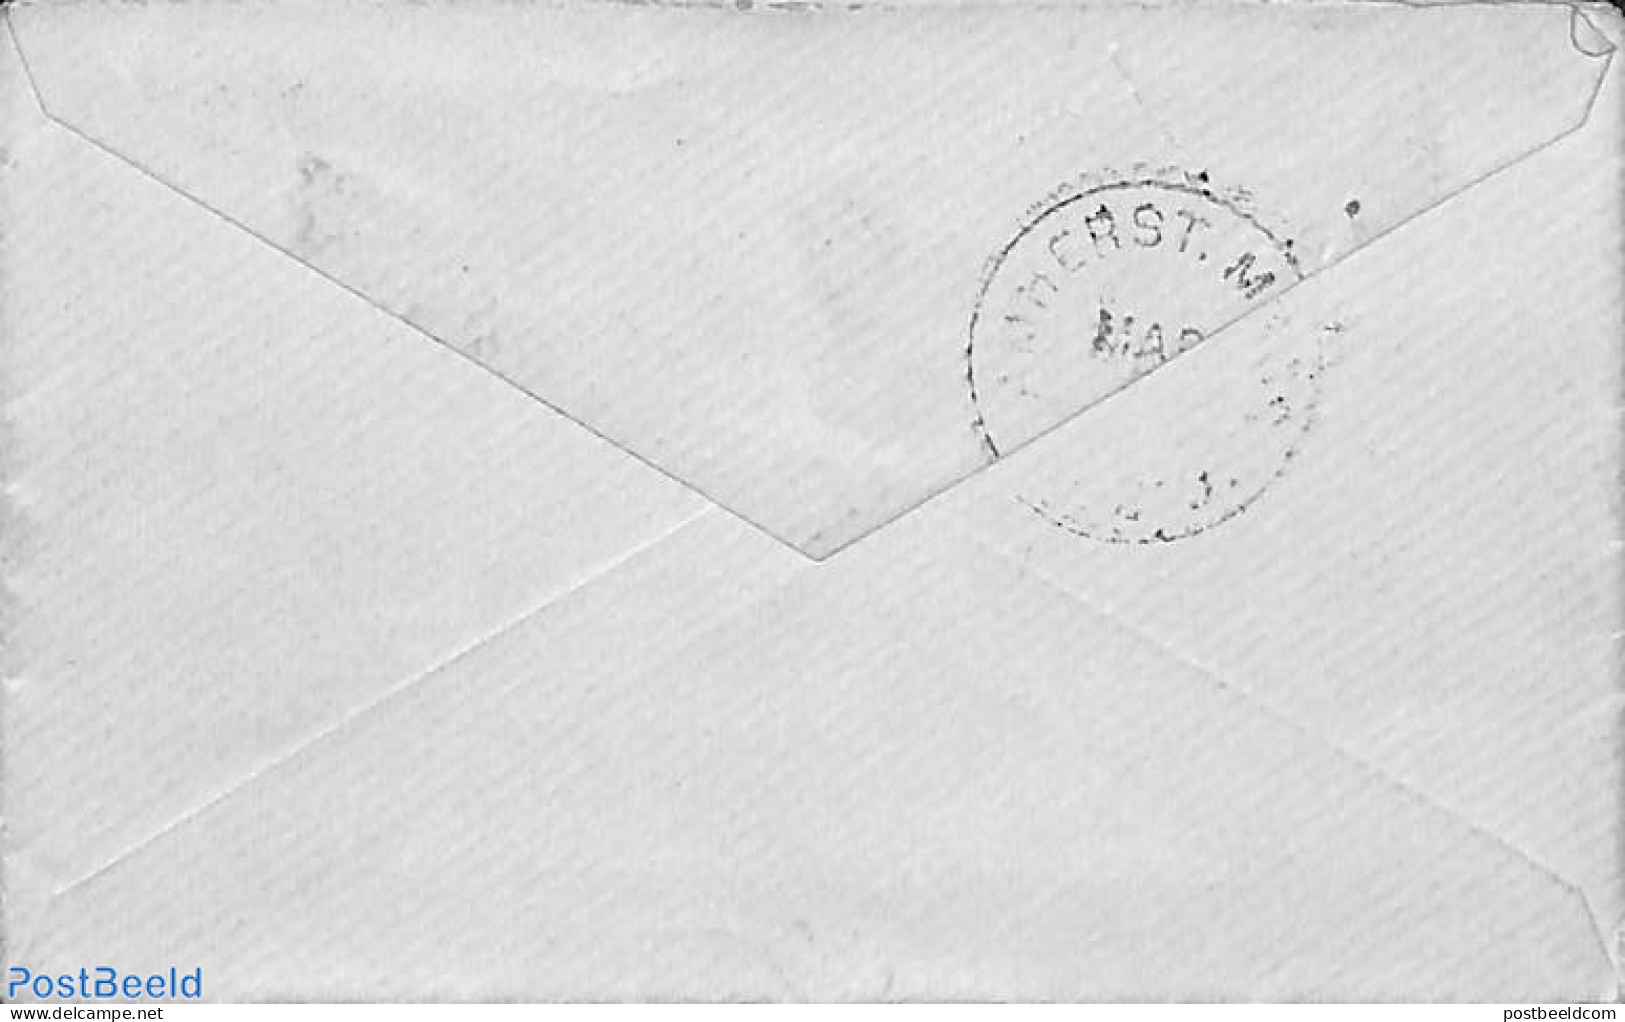 United States Of America 1885 Cover From Lexington, Massachusetts To Amherst, Massachusetts., Postal History - Covers & Documents